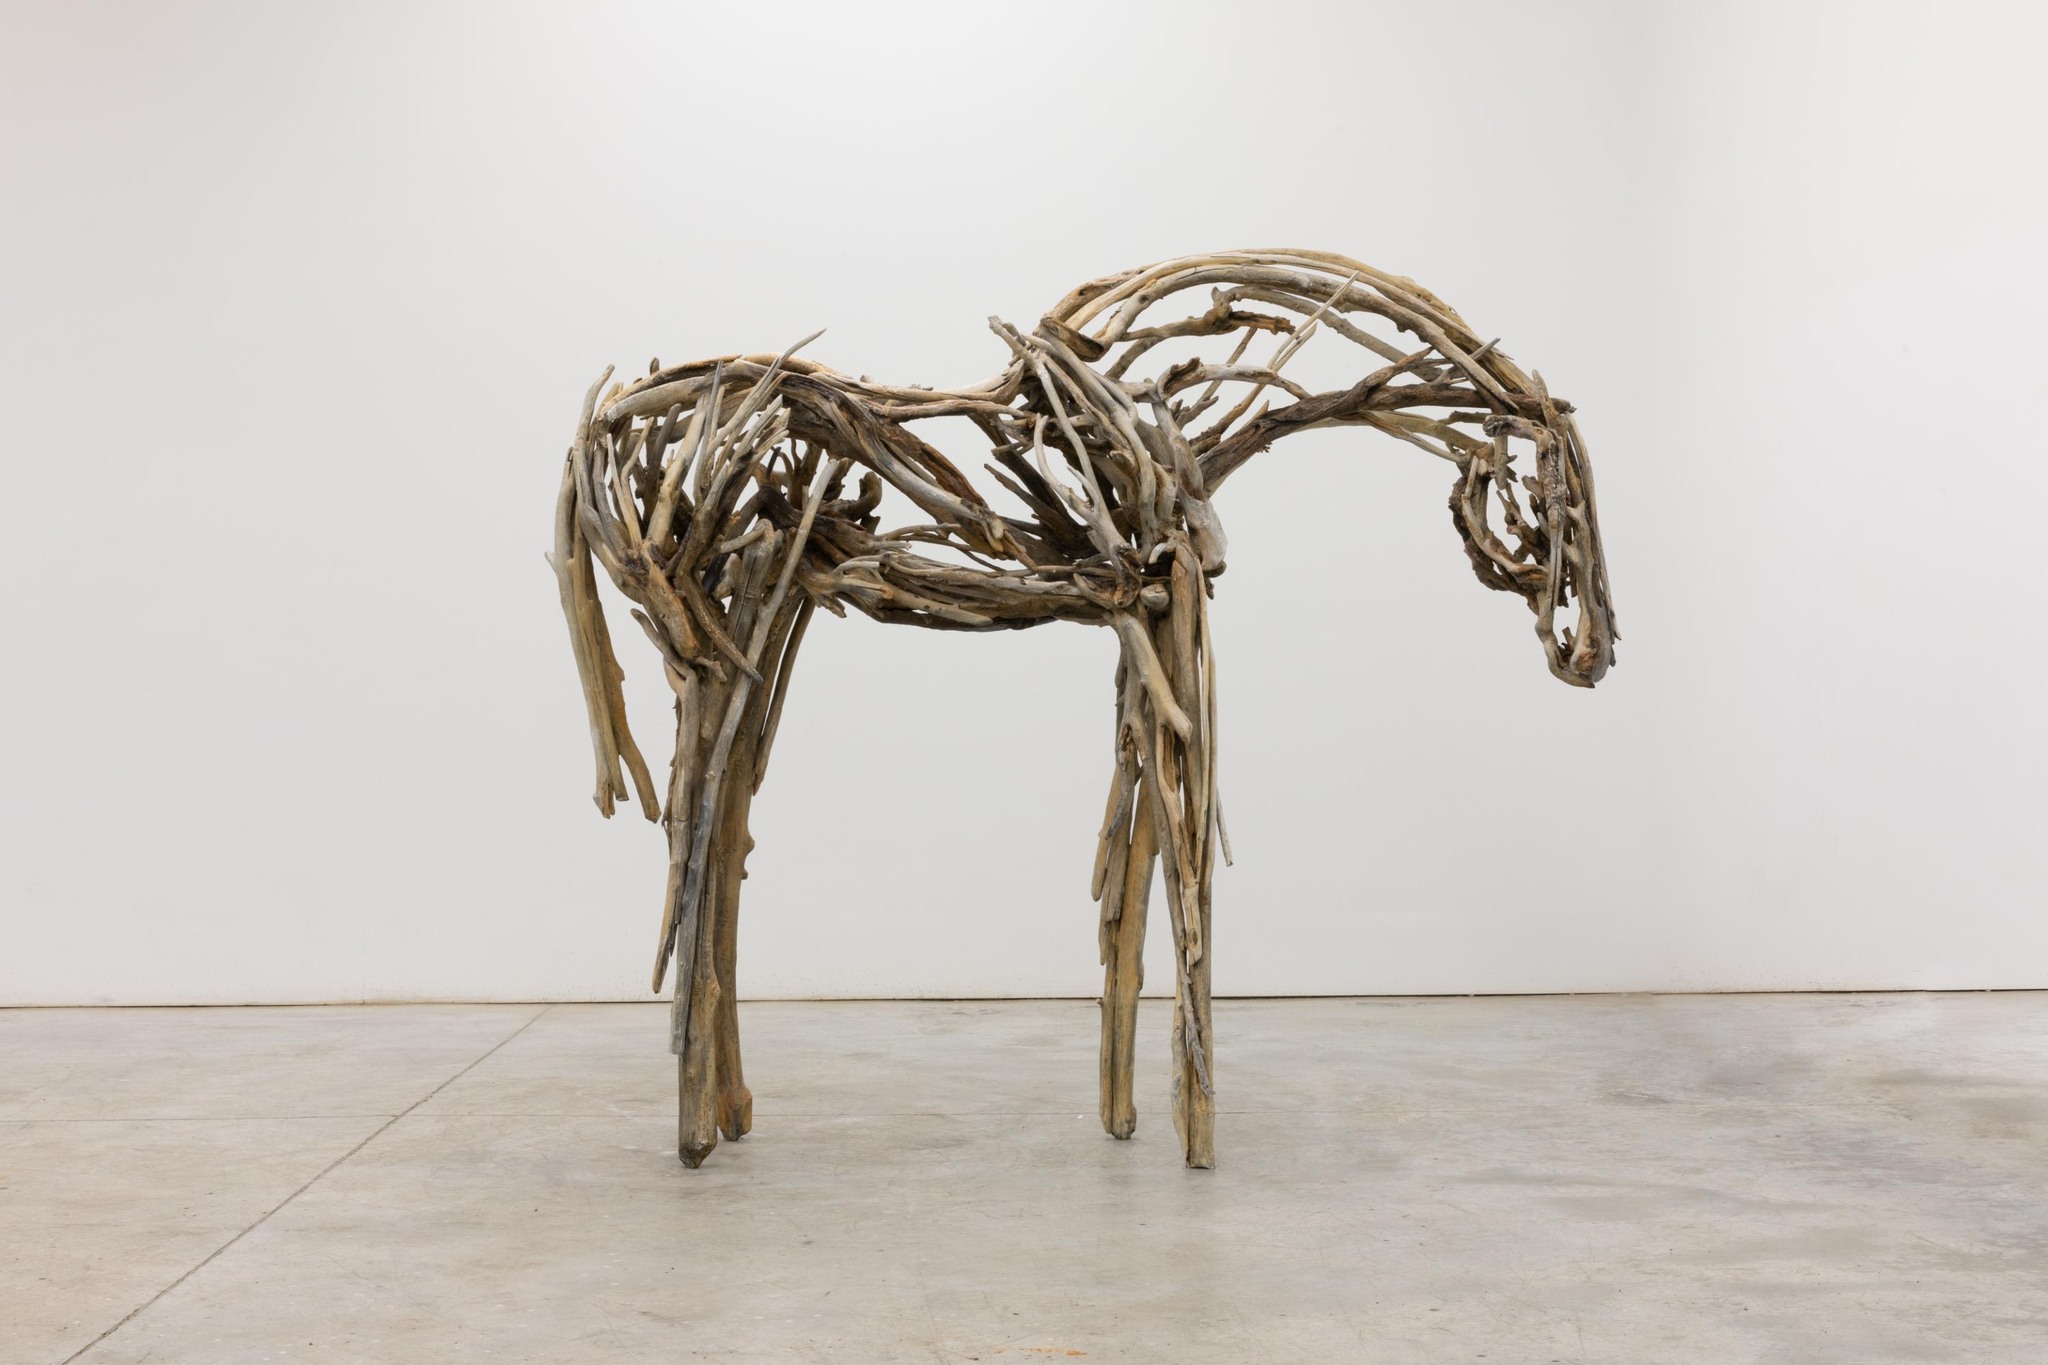 A picture of Deborah Butterfield's Lumen scuplture. It is a scuplture in the shape of a horse, constructed from branches and sticks to develop the sculpture's form.